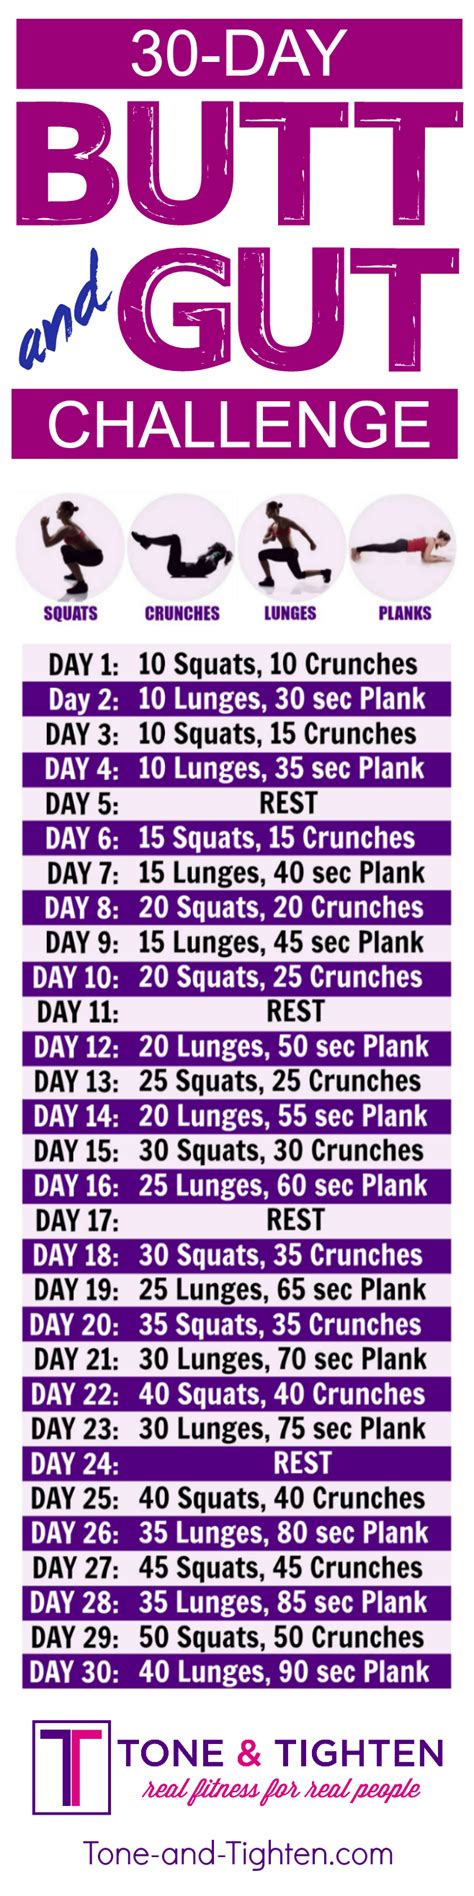 30 Day workout plan for your butt and abs | Tone and Tighten